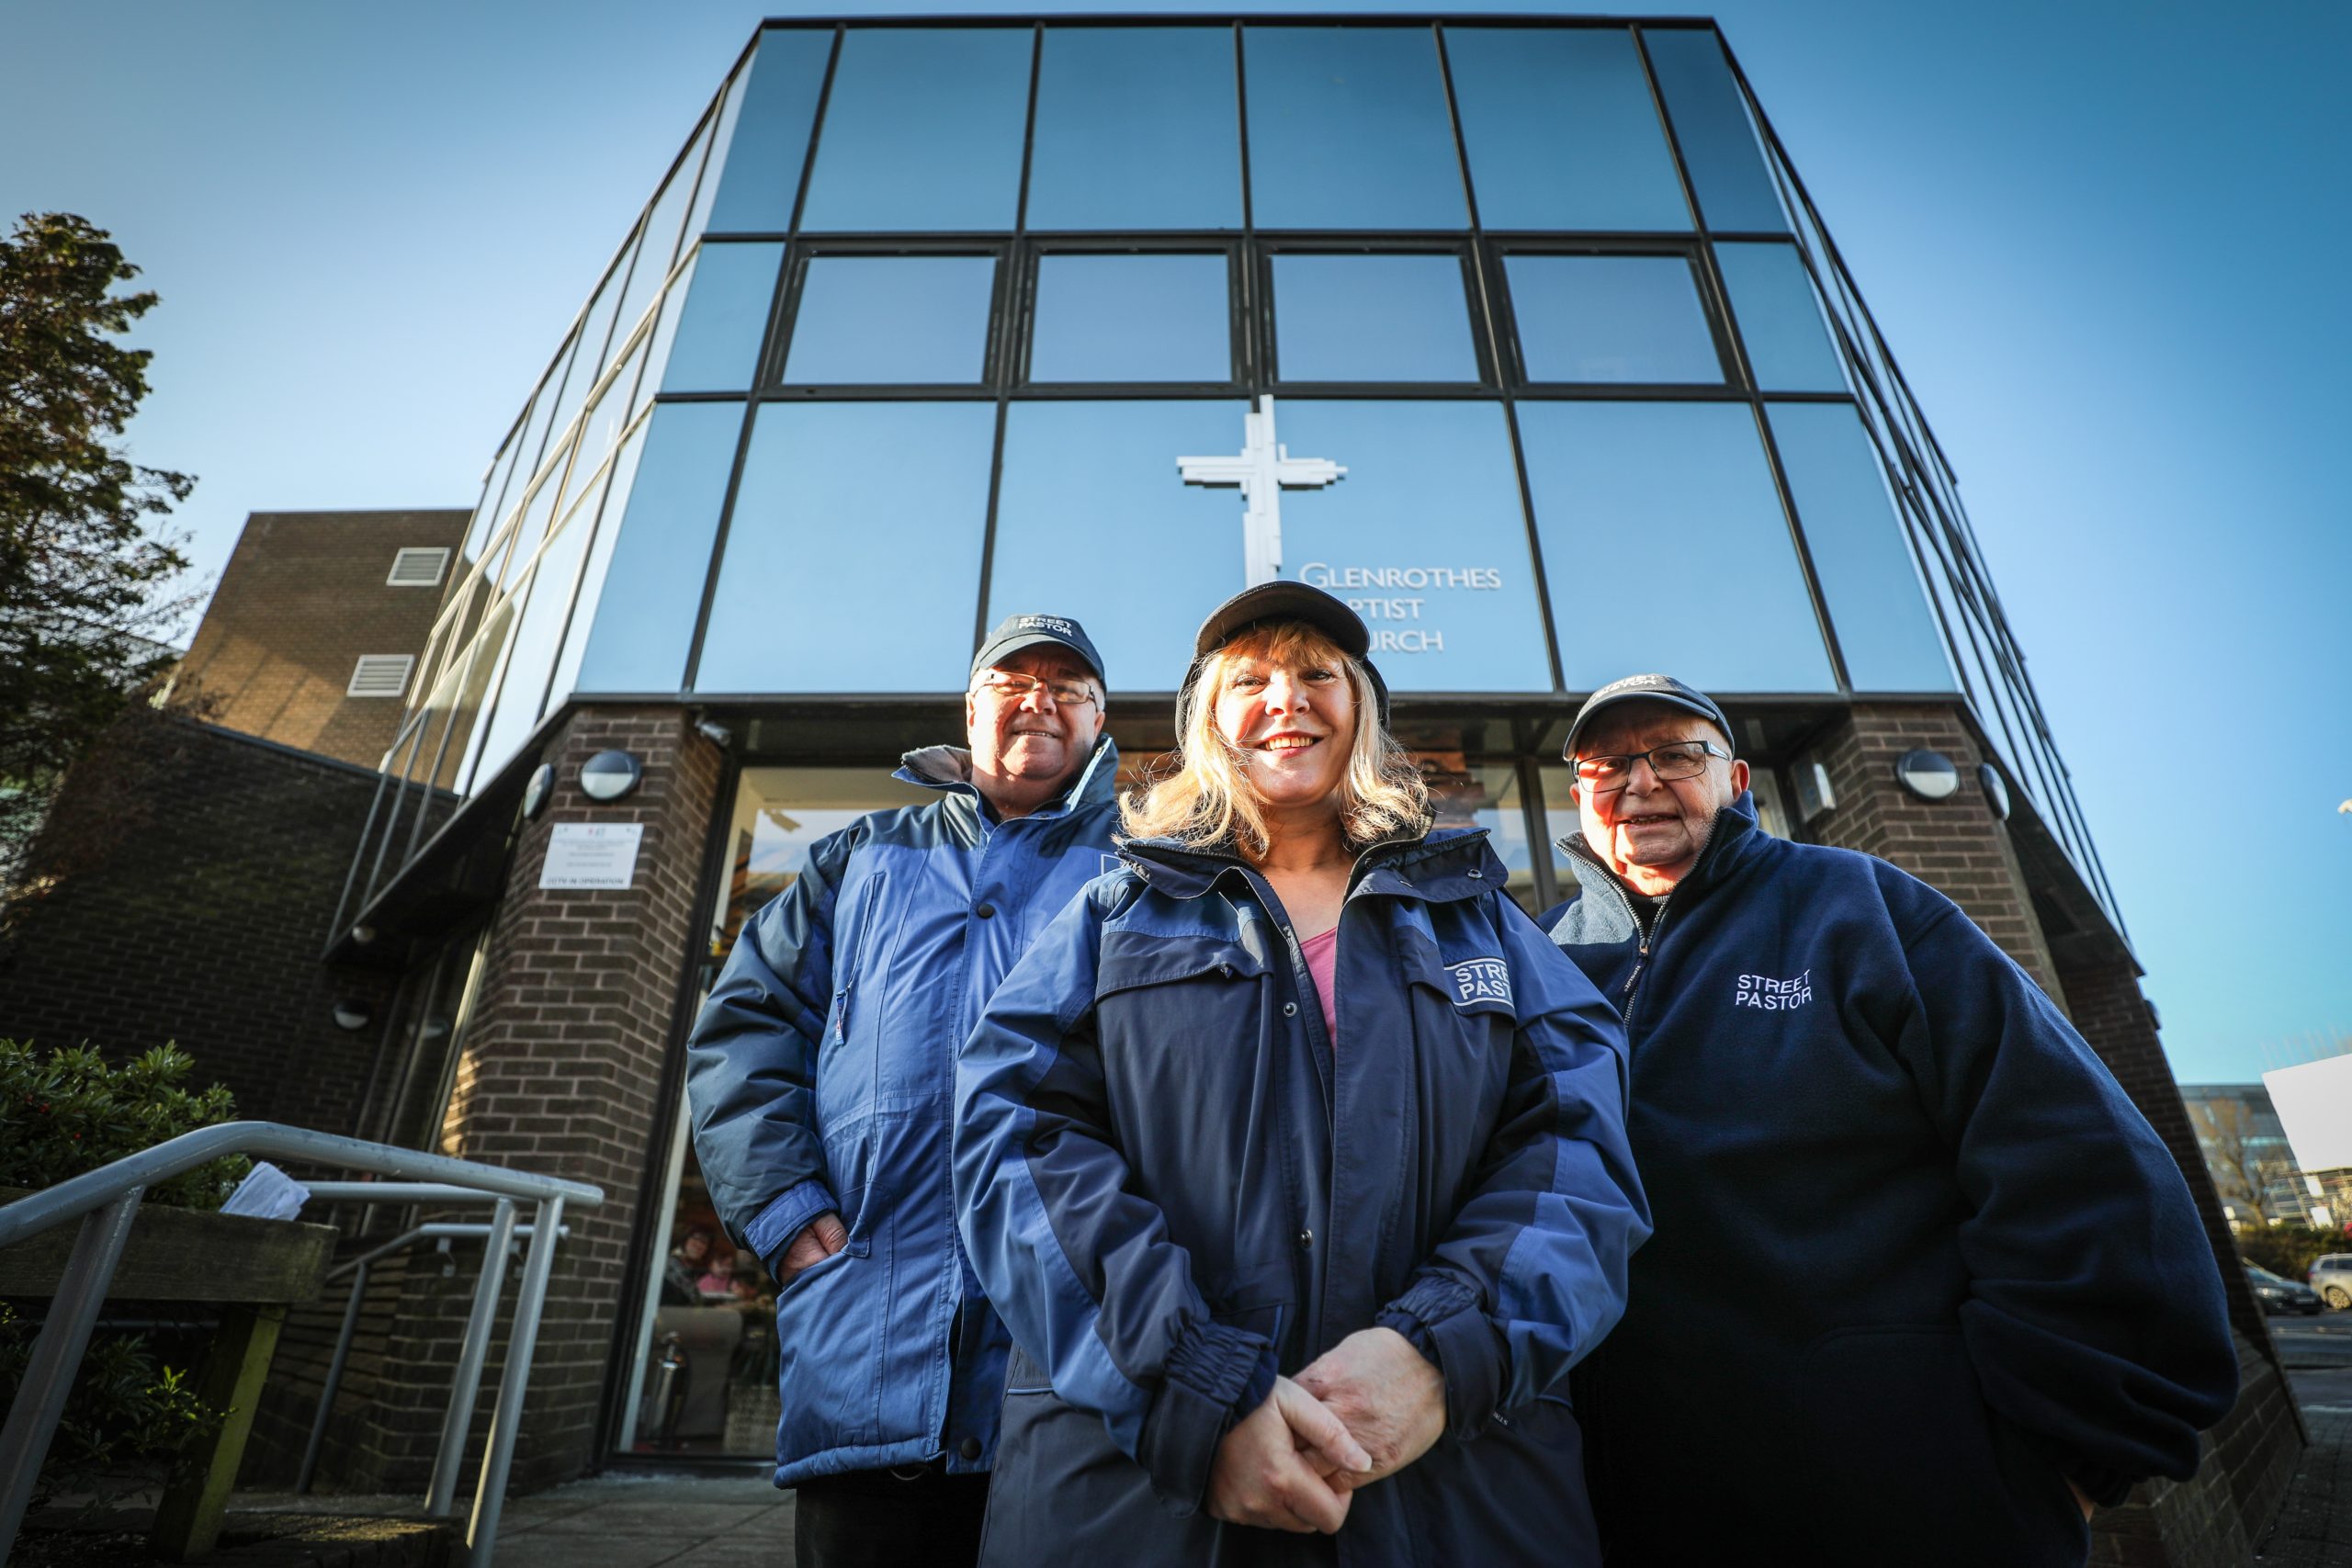 Street Pastors in Fife are celebrating 10 year anniversary this week. They hope to increase numbers to keep the charity/volunteer service running for another 10 years. Pic shows; L/R, Rob Weir, Secretary/Treasurer, Susie Anderson Street Pastor and Ian Spiers, Chairman.